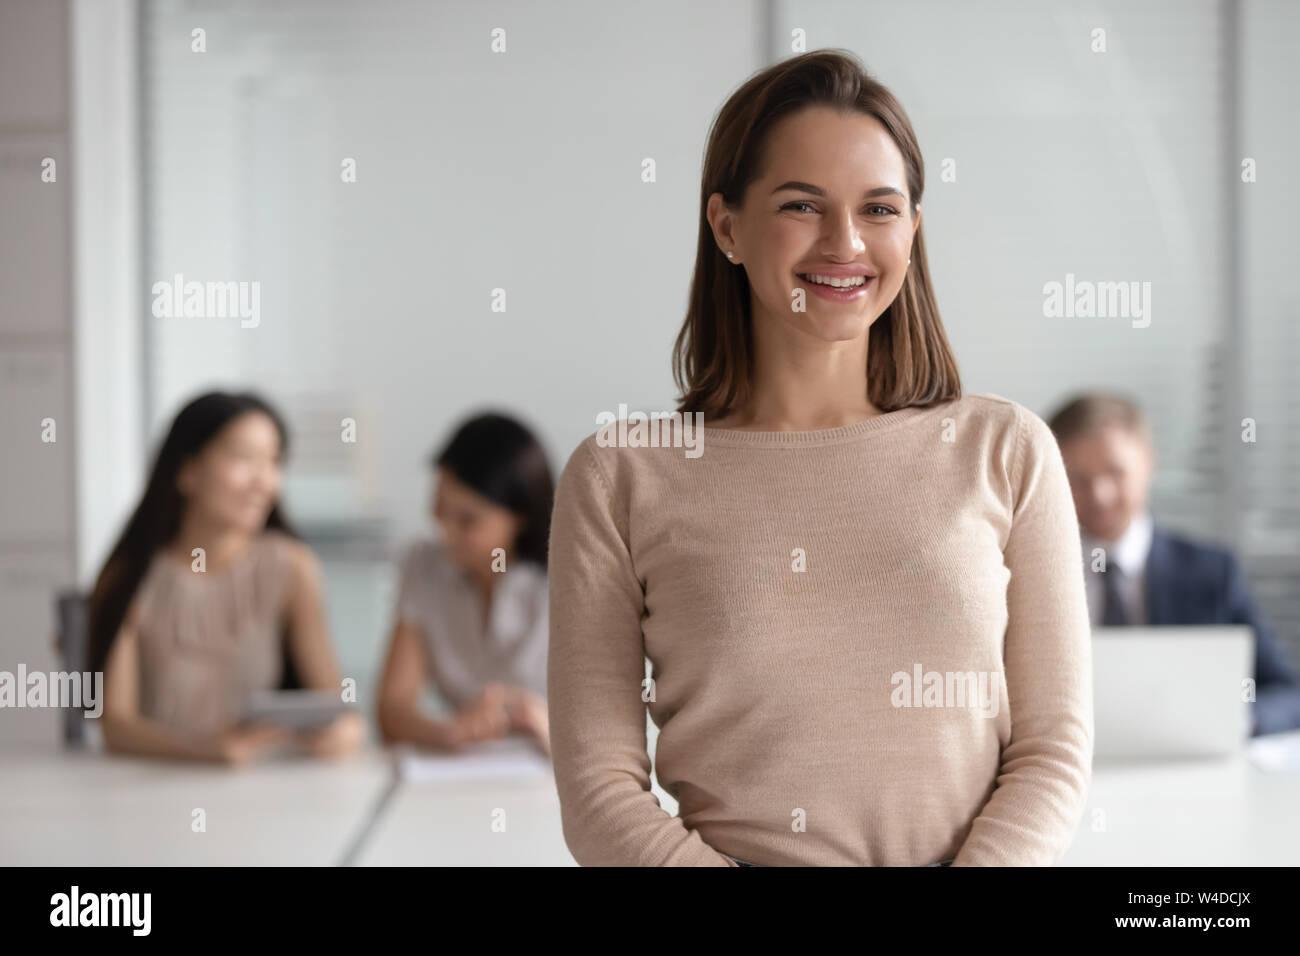 Cheerful young female leader looking at camera in corporate office Stock Photo